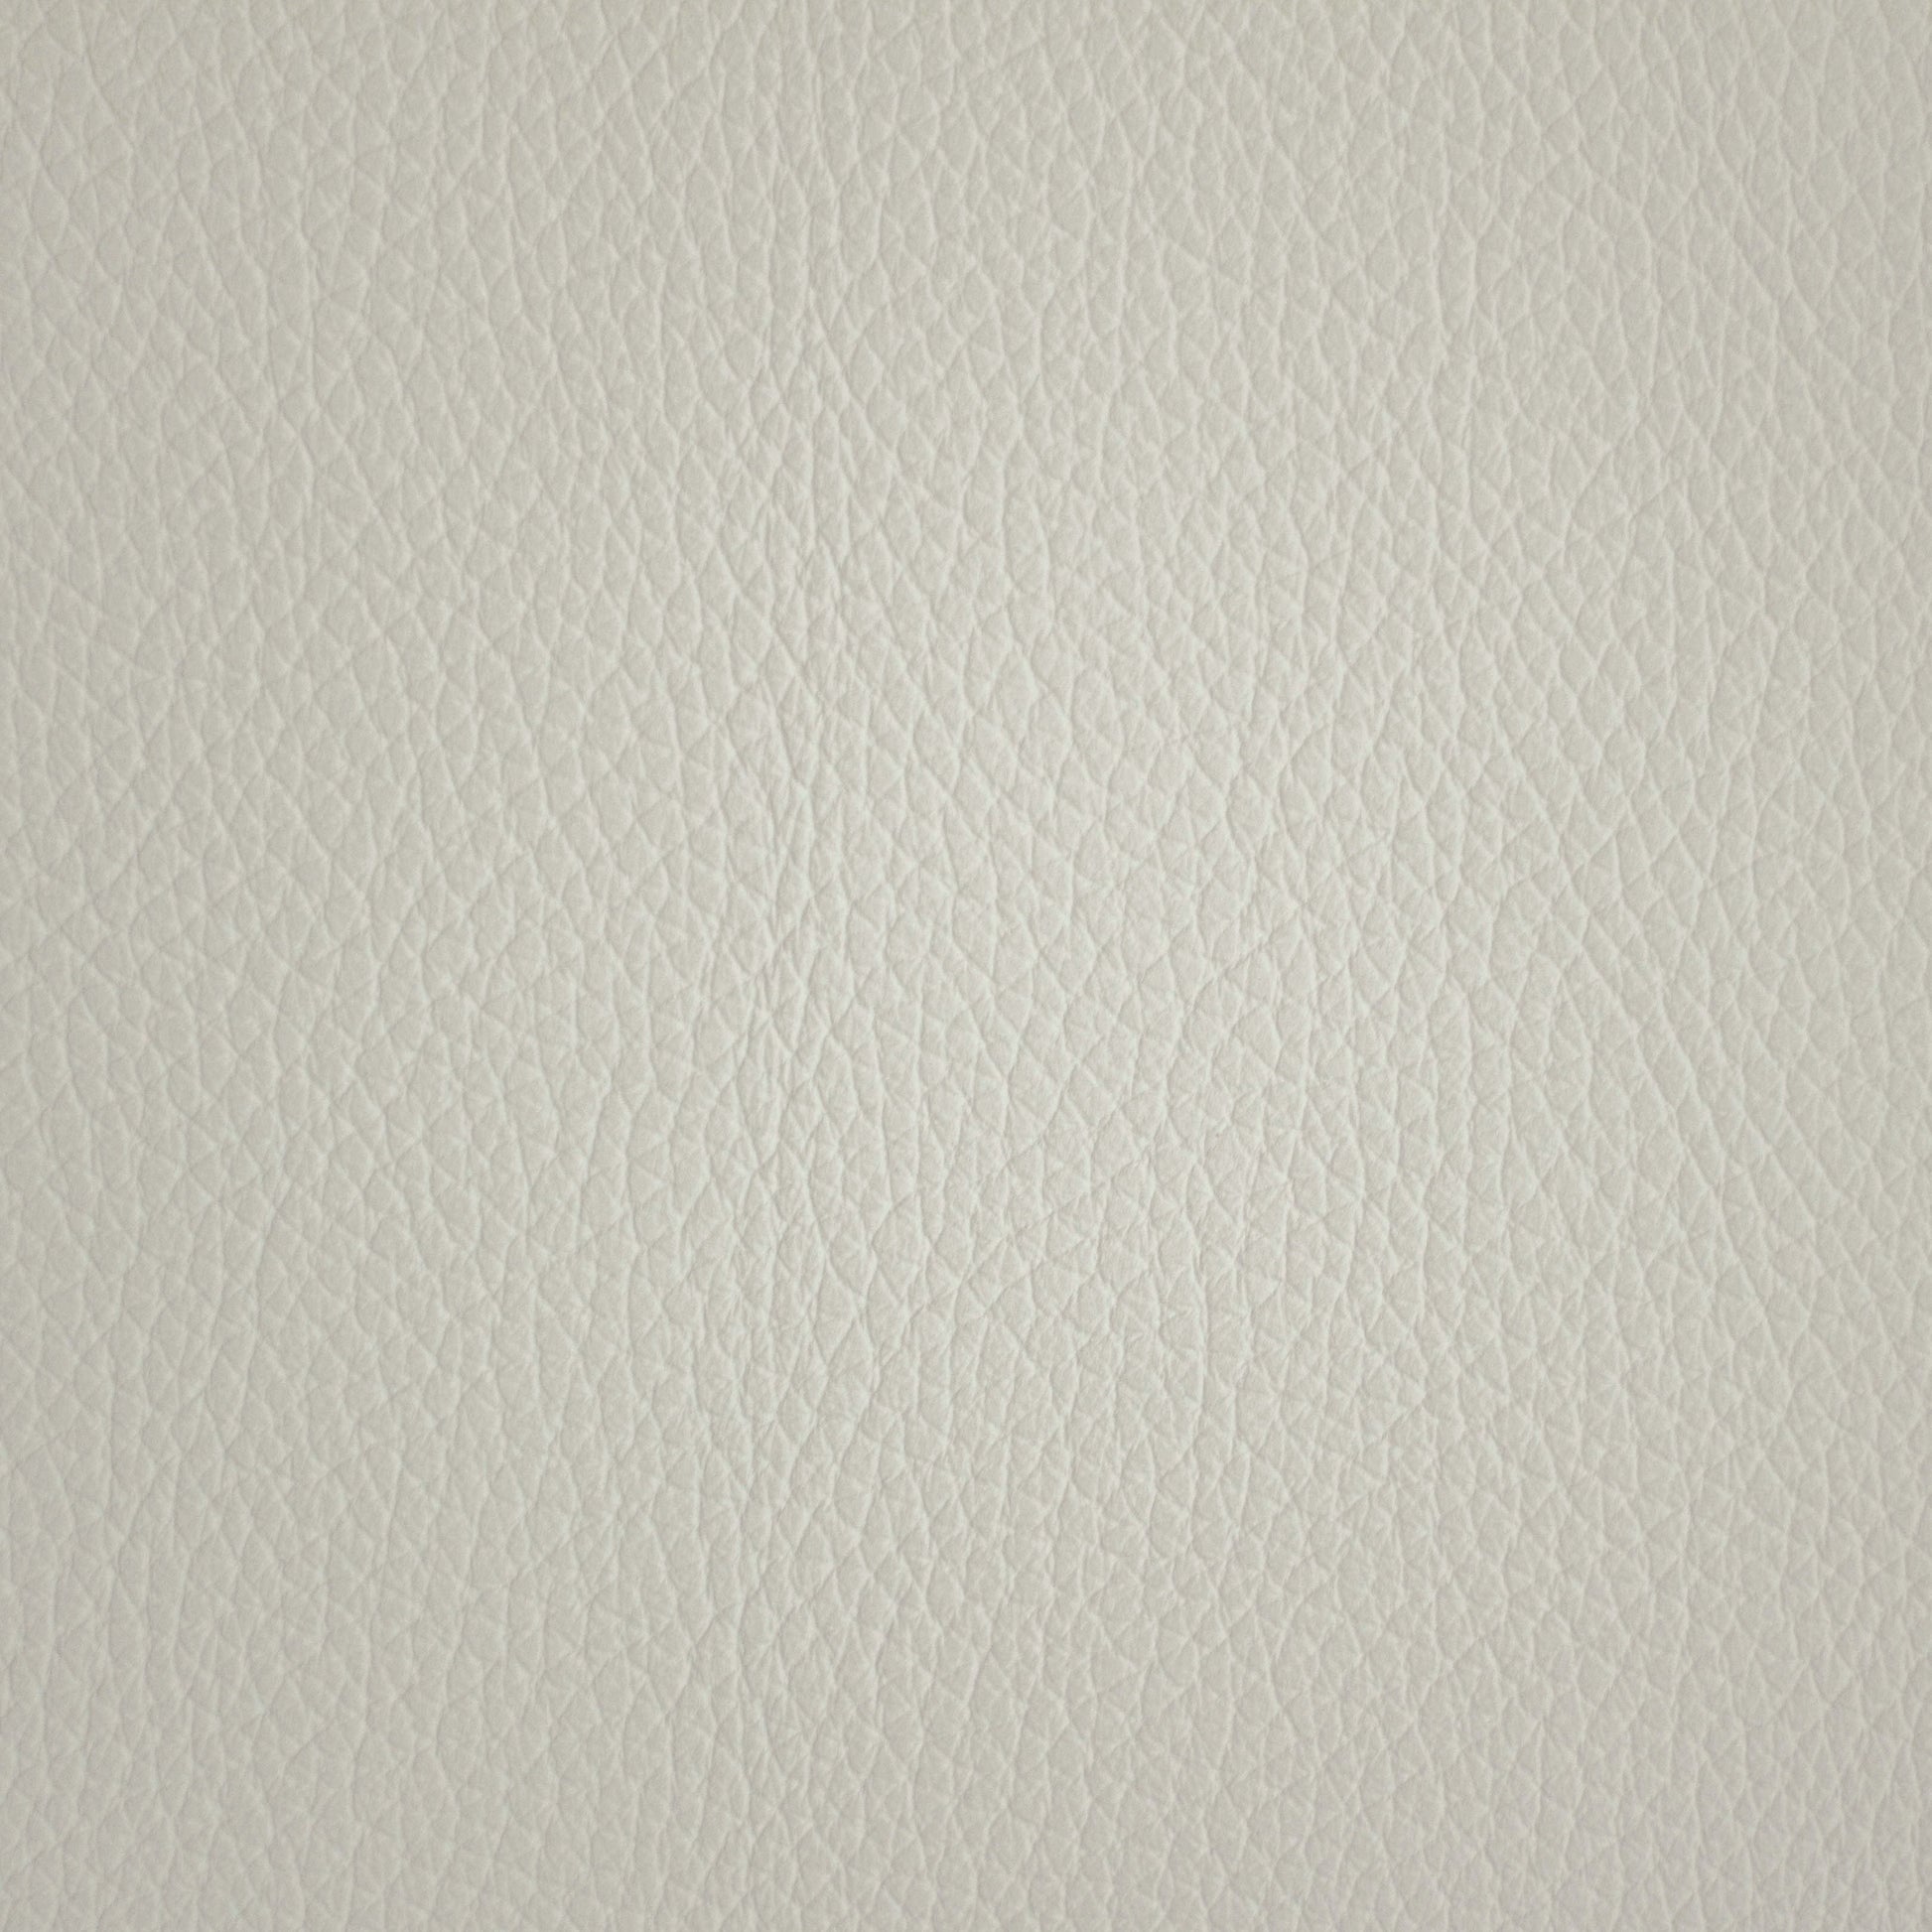 Mystique, Blizzard, Iconic® Antimicrobial & Cleanable, Hospitality Leather Hide